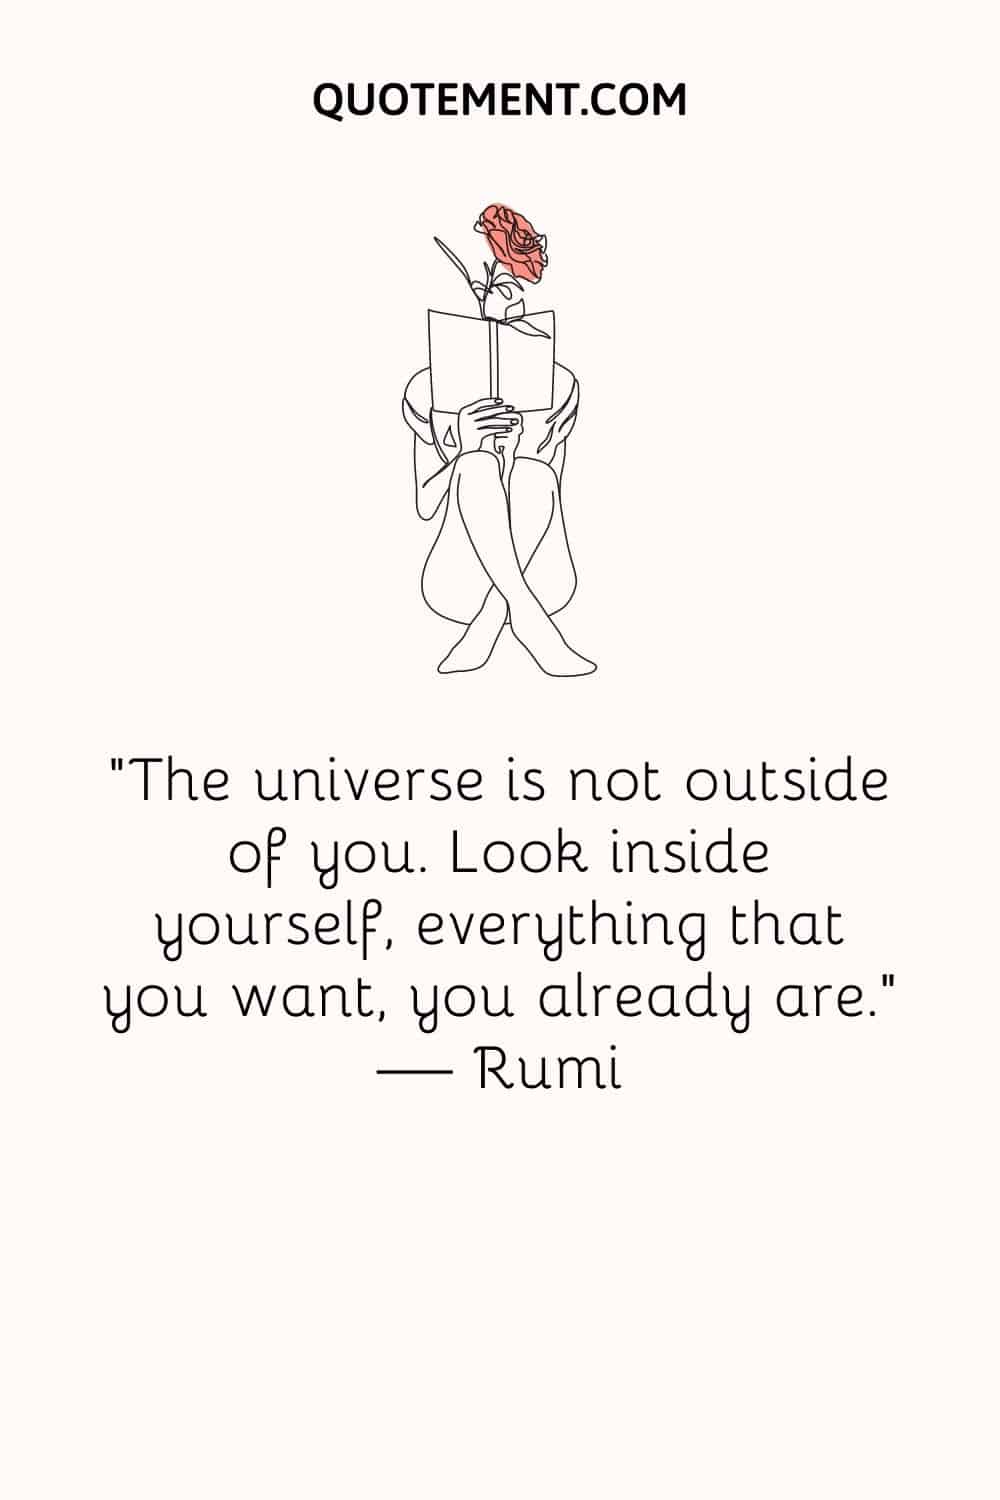 The universe is not outside of you. Look inside yourself, everything that you want, you already are